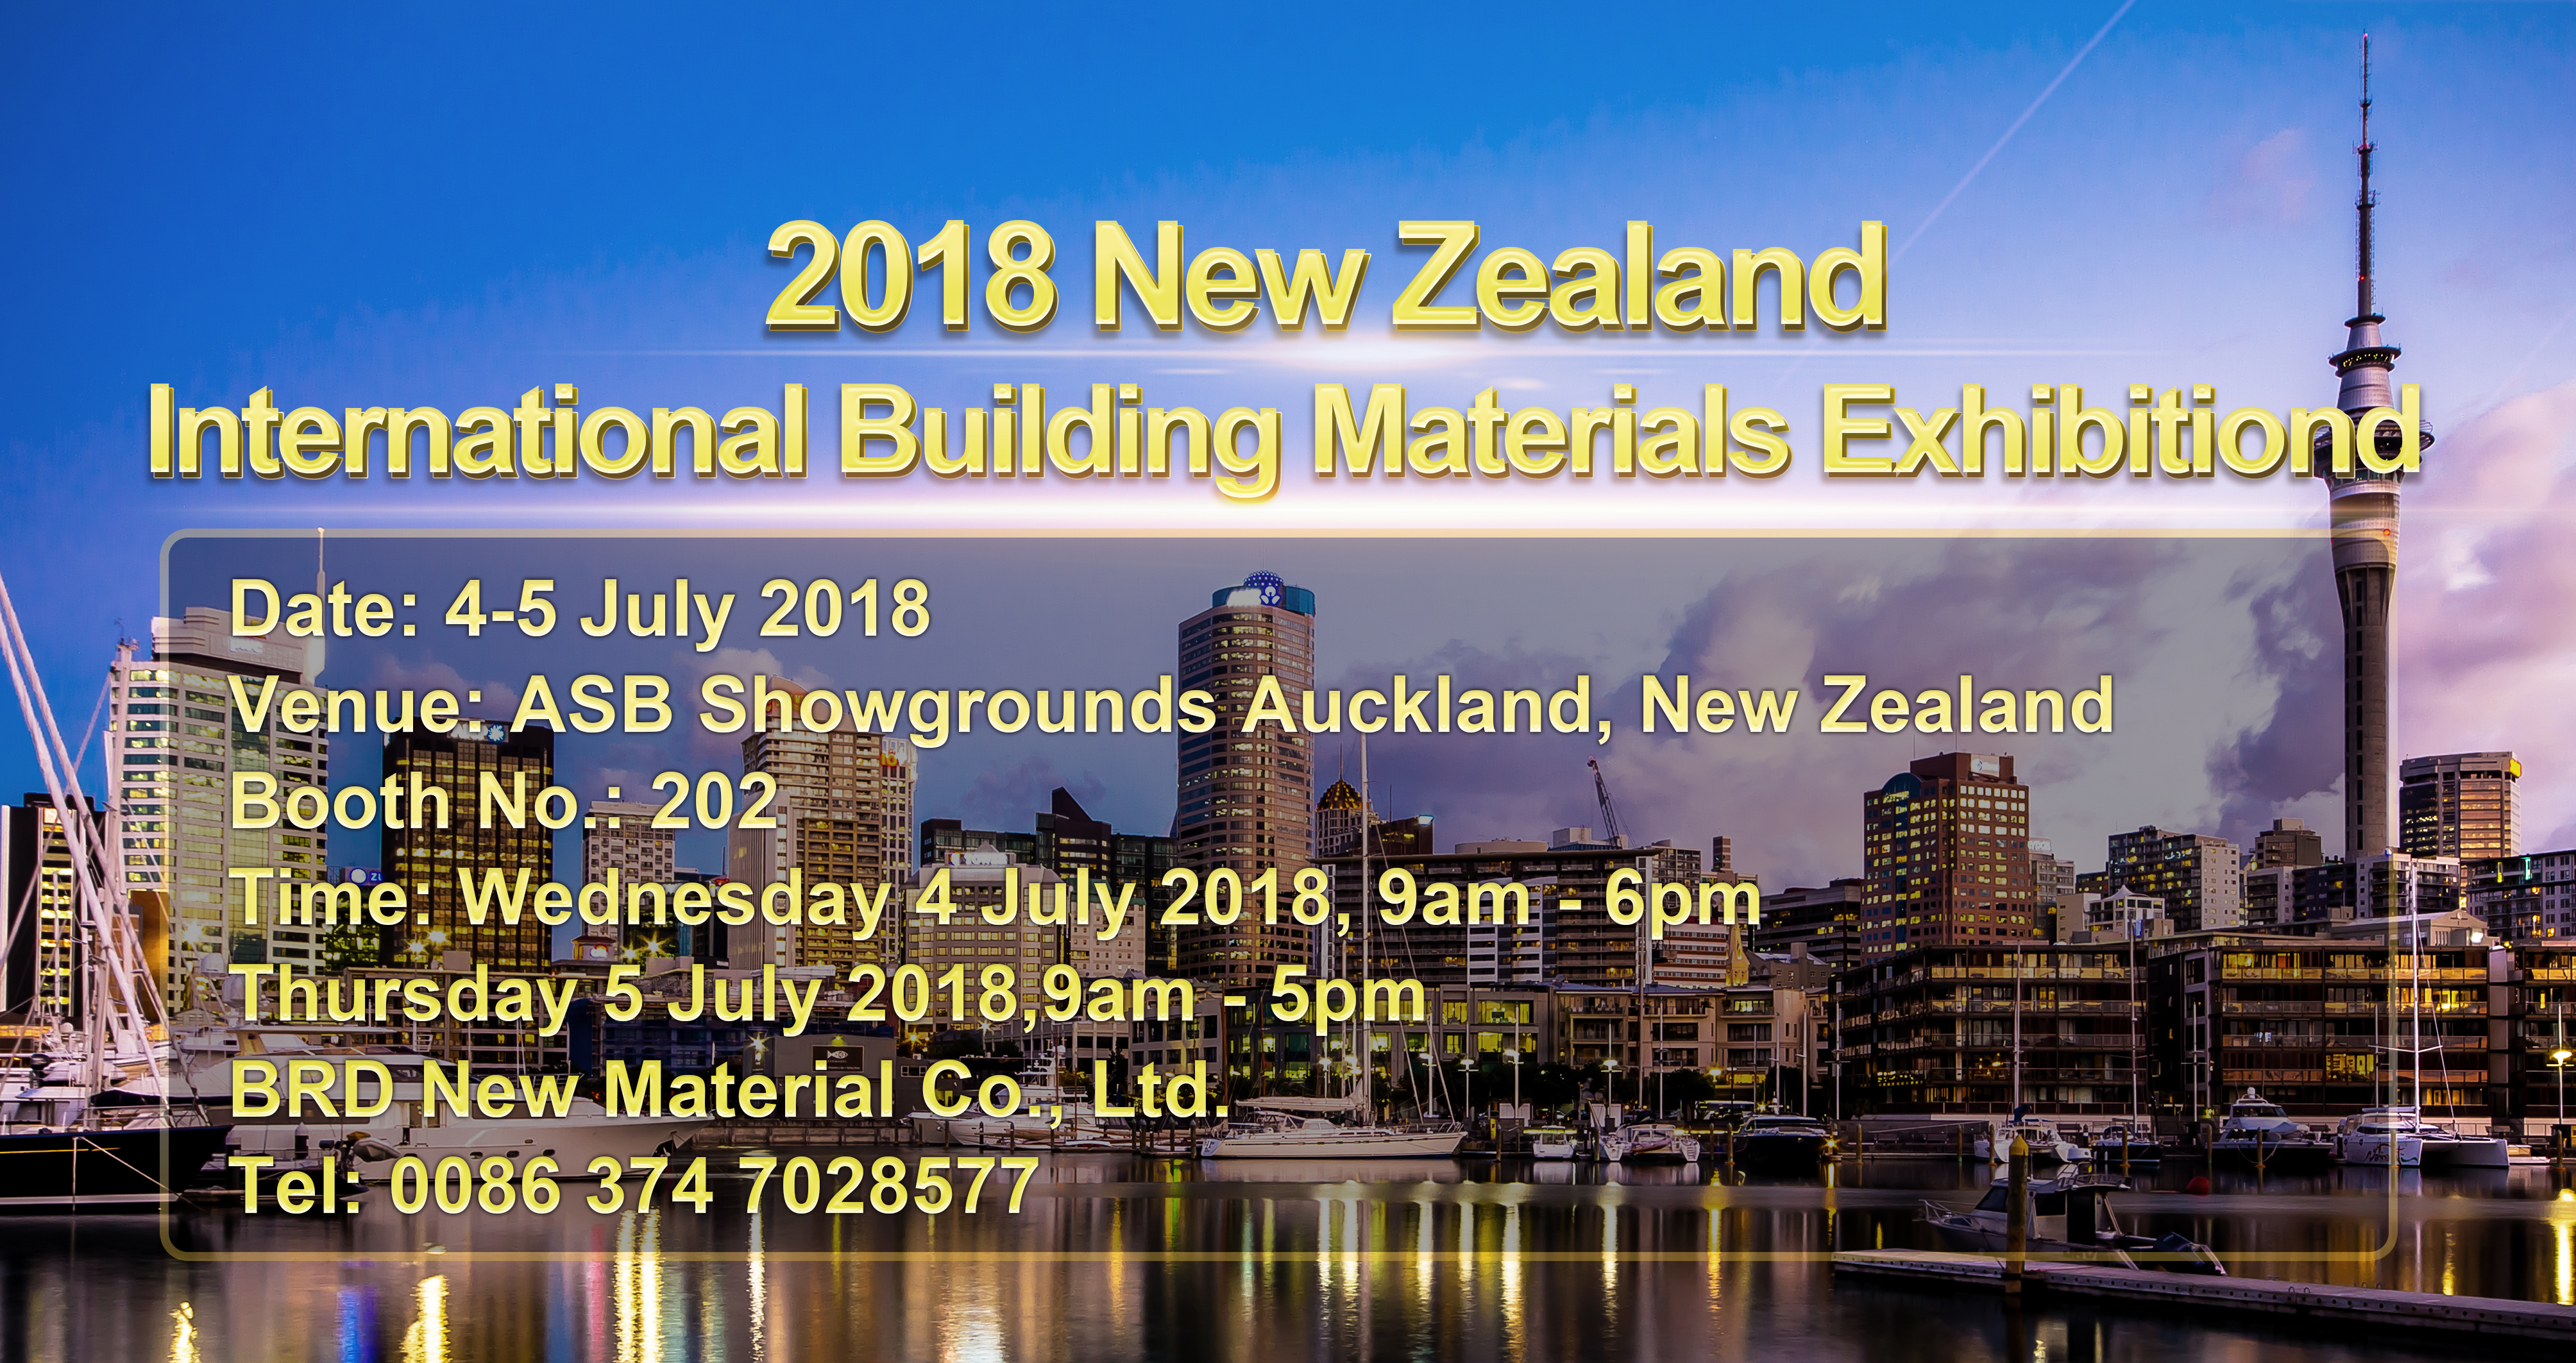 New Zealand Exhibition, Welcome to Visit BRD Booth